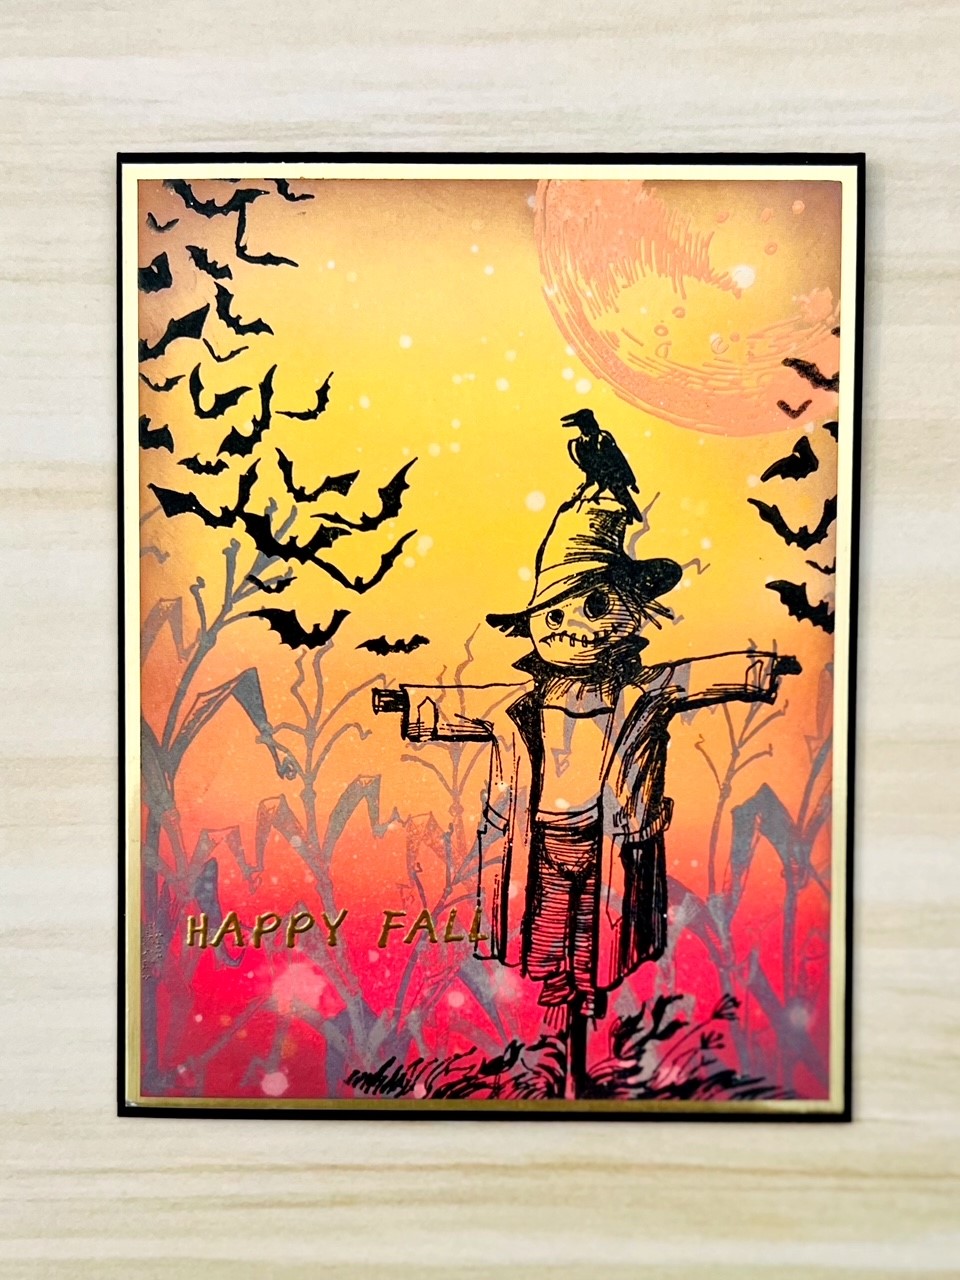 Stampers Anonymous Tim Holtz - Falll Cards - Creative Scrapbooker Magazine - Ranger - 2